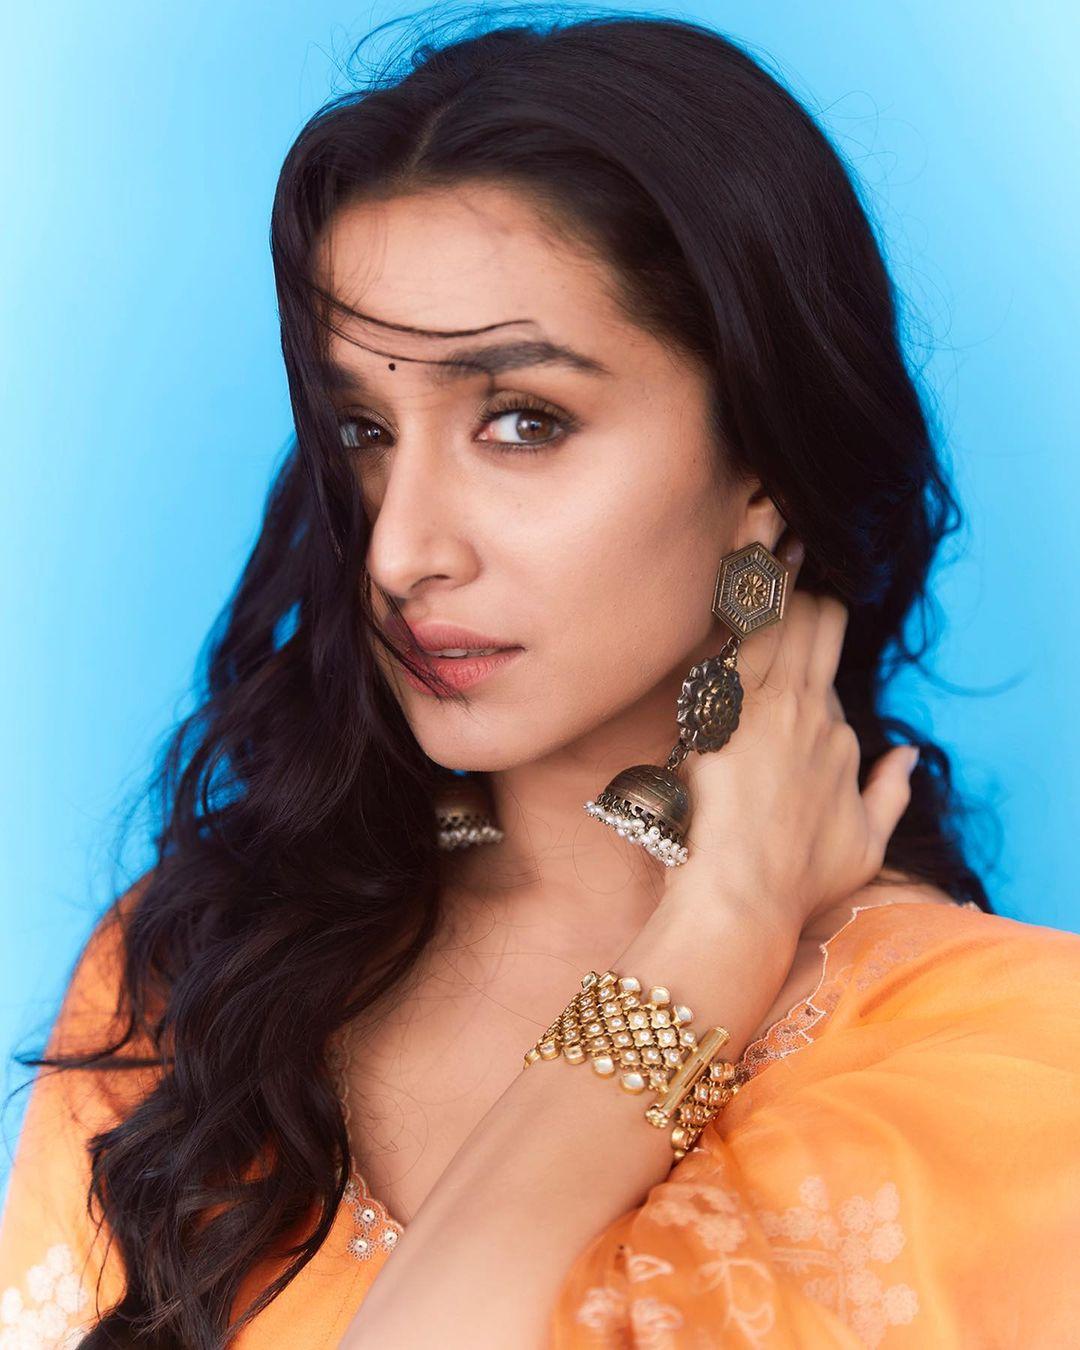 To elevate her look without much effort, the actress put on intricate big jhumkas, which are just making her look gorgeous. The cute black bindi on her forehead and a few simple bangles finished her look